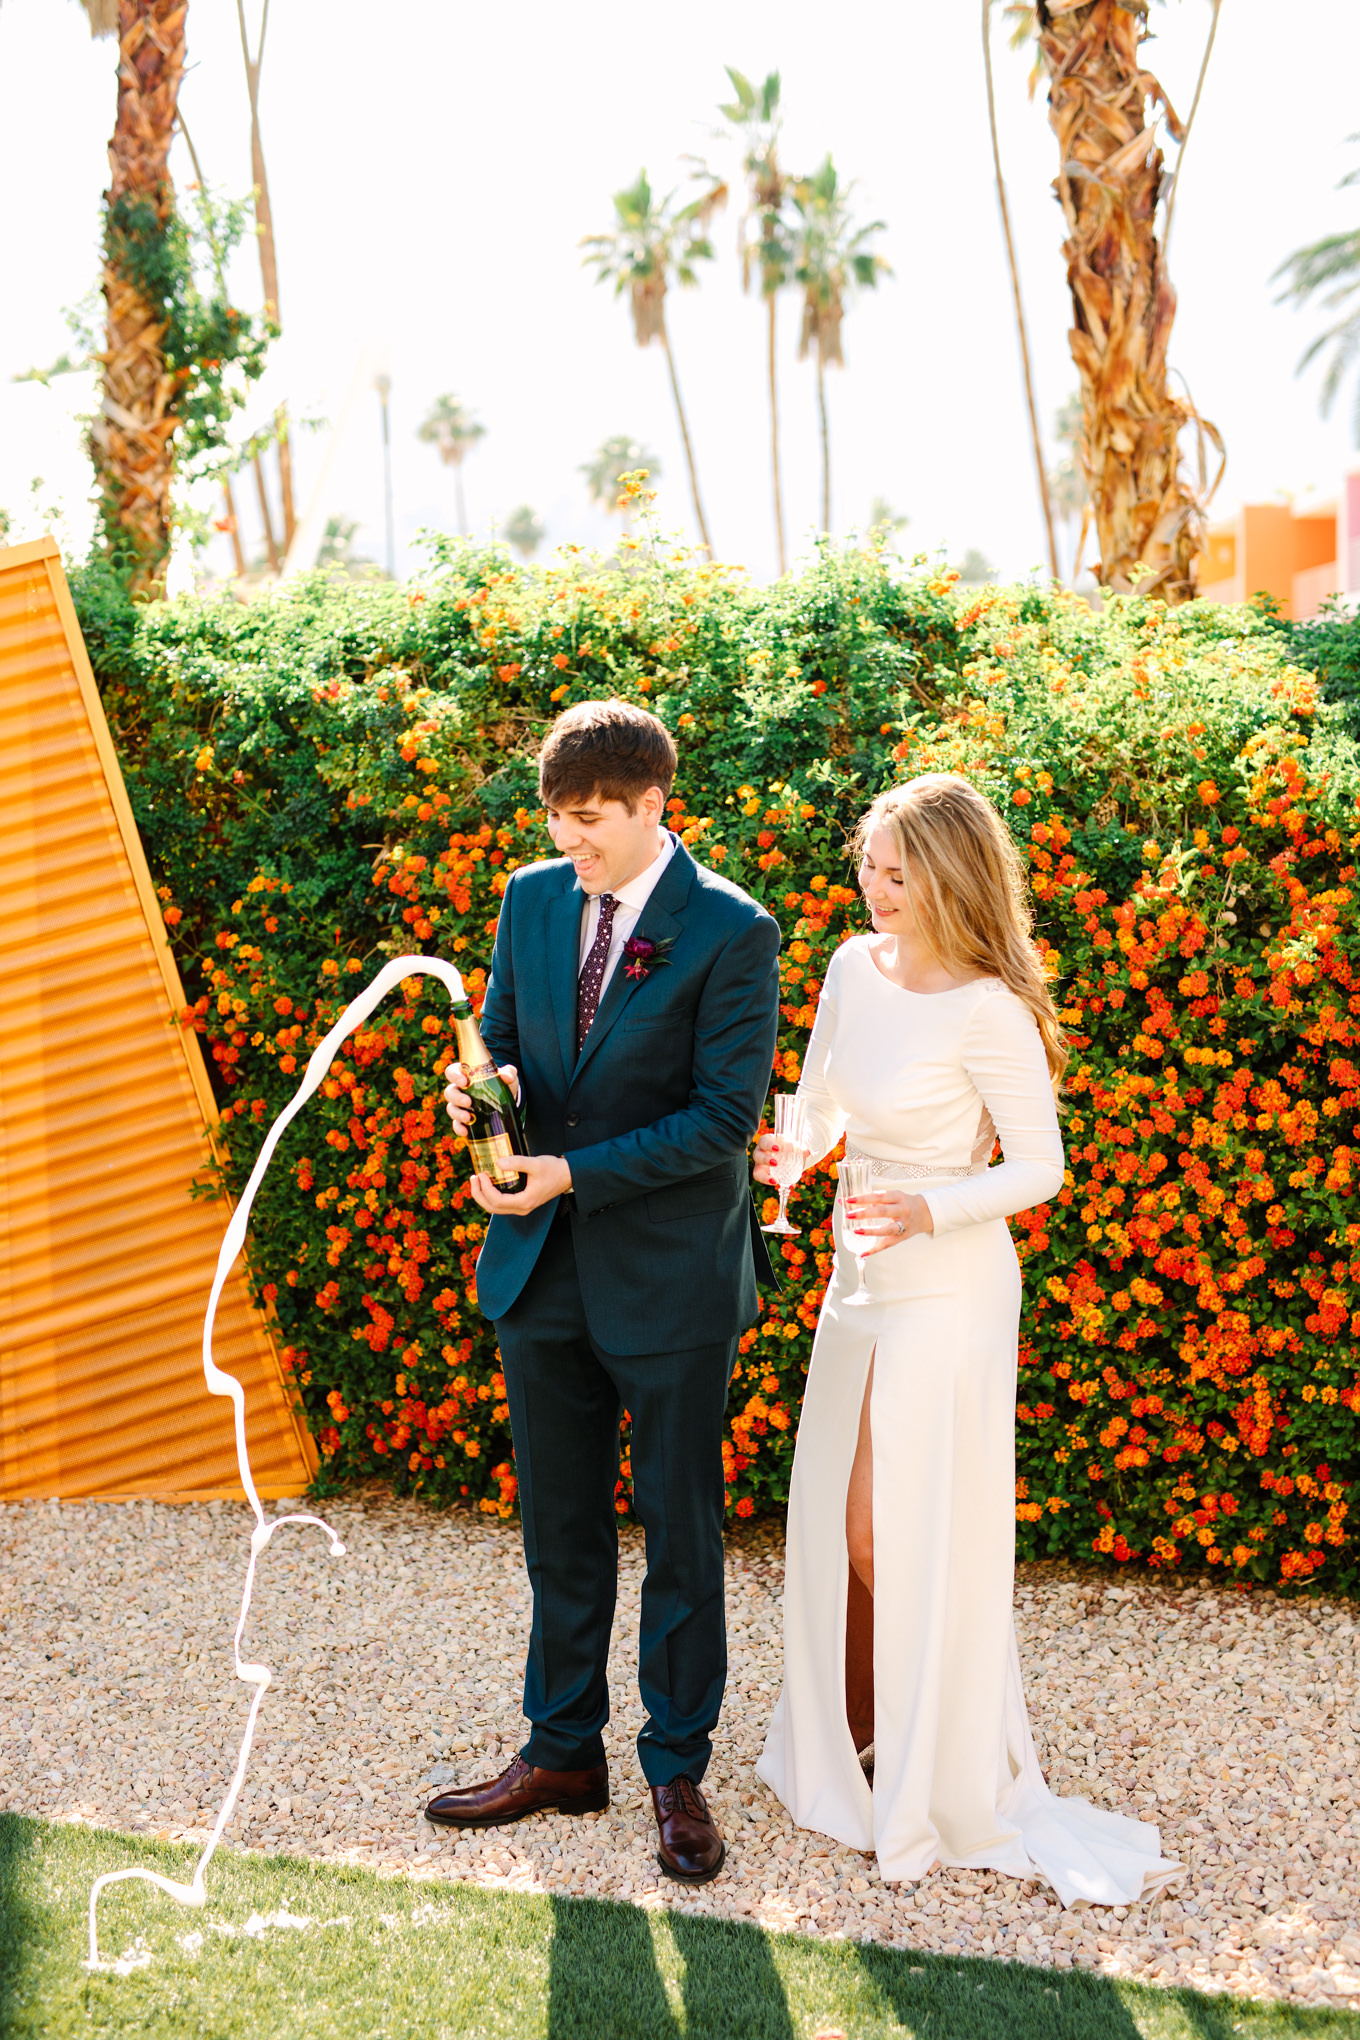 Champagne pop at Saguaro Palm Springs | Colorful jewel tone Palm Springs elopement | Fresh and colorful photography for fun-loving couples in Southern California | #colorfulelopement #palmspringselopement #elopementphotography #palmspringswedding Source: Mary Costa Photography | Los Angeles